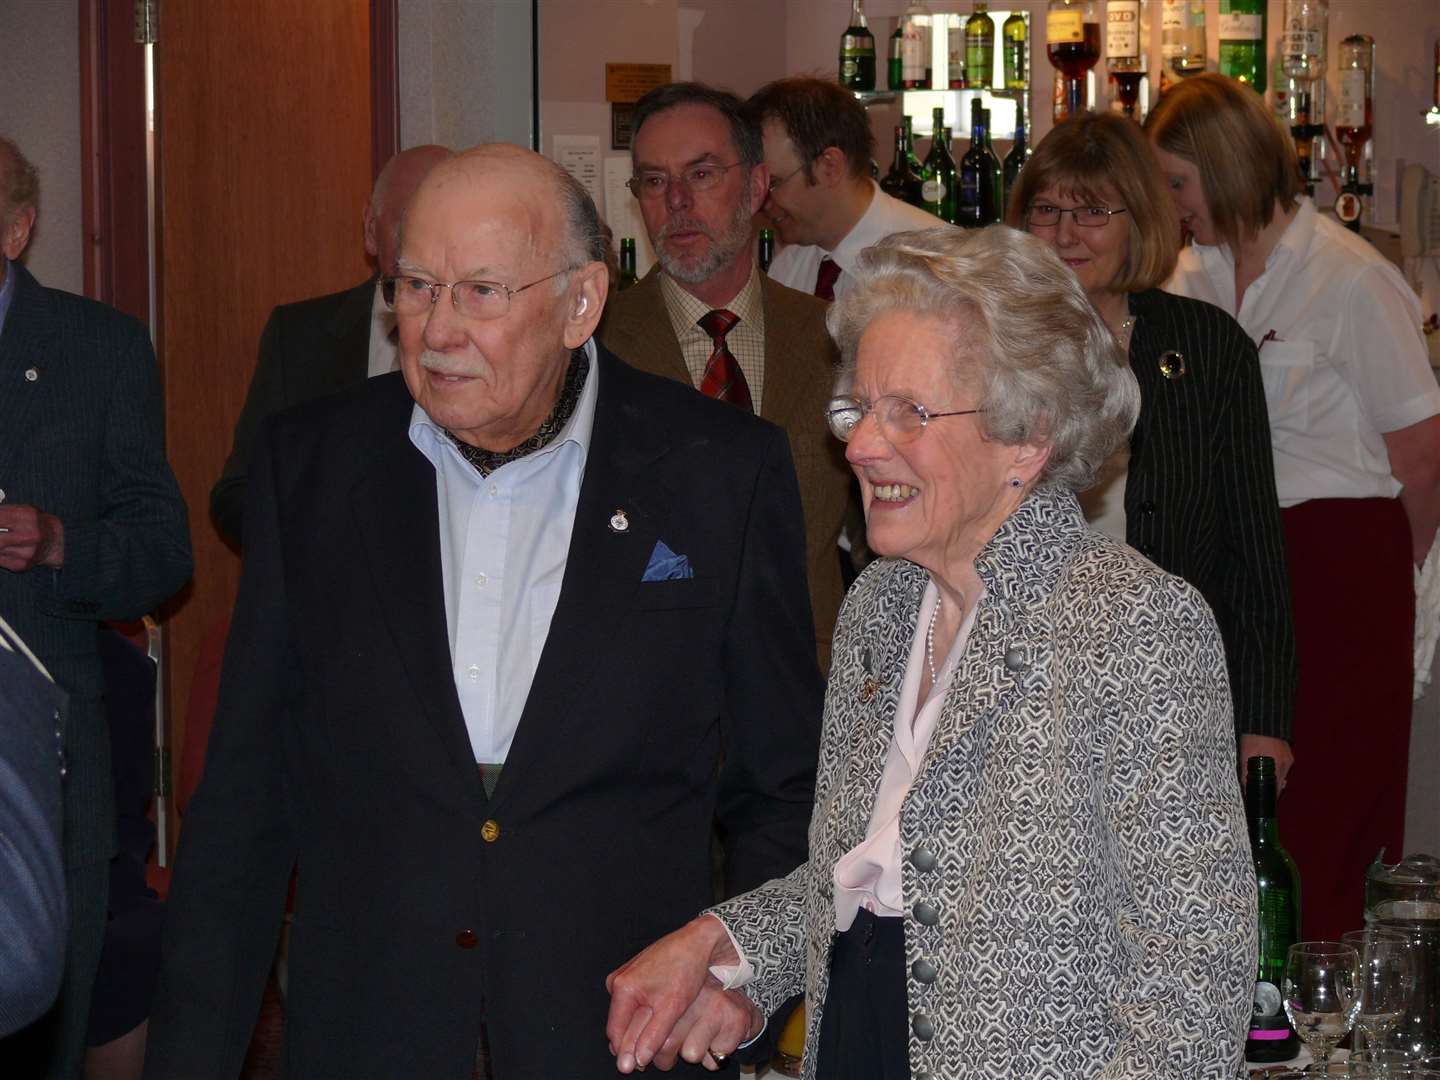 Bill with his wife Helen during his 90th birthday celebrations at the Laichmoray hotel in Elgin.